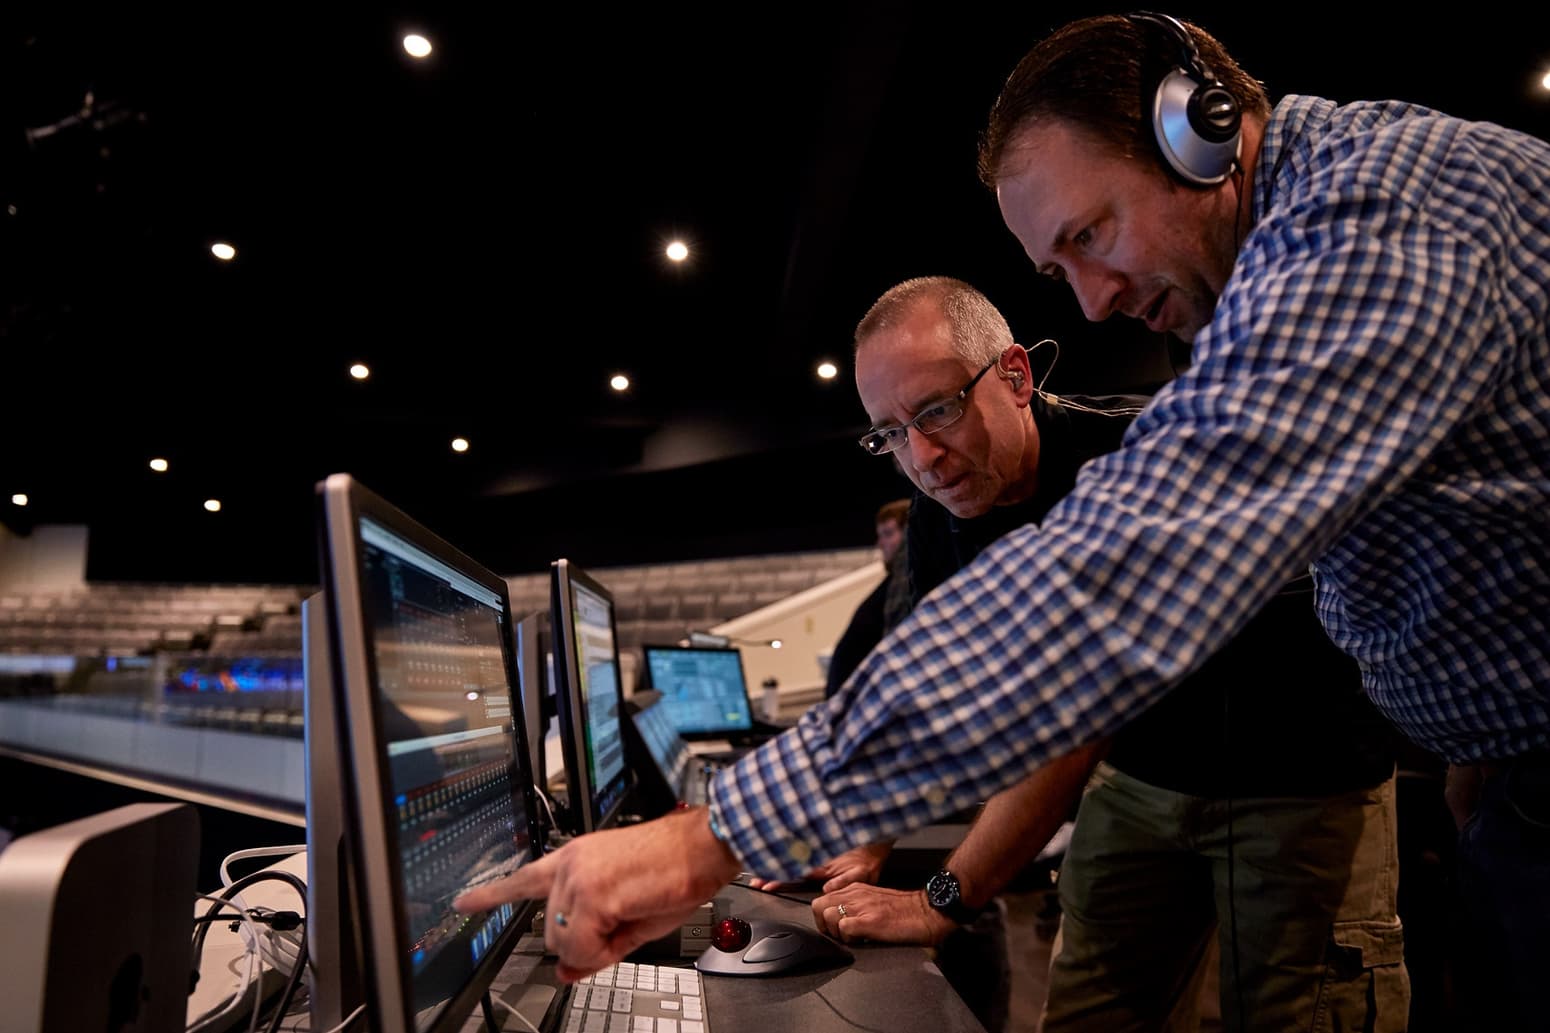 Audio design and AVL sound experts from Paragon 360 discuss a sound design project.